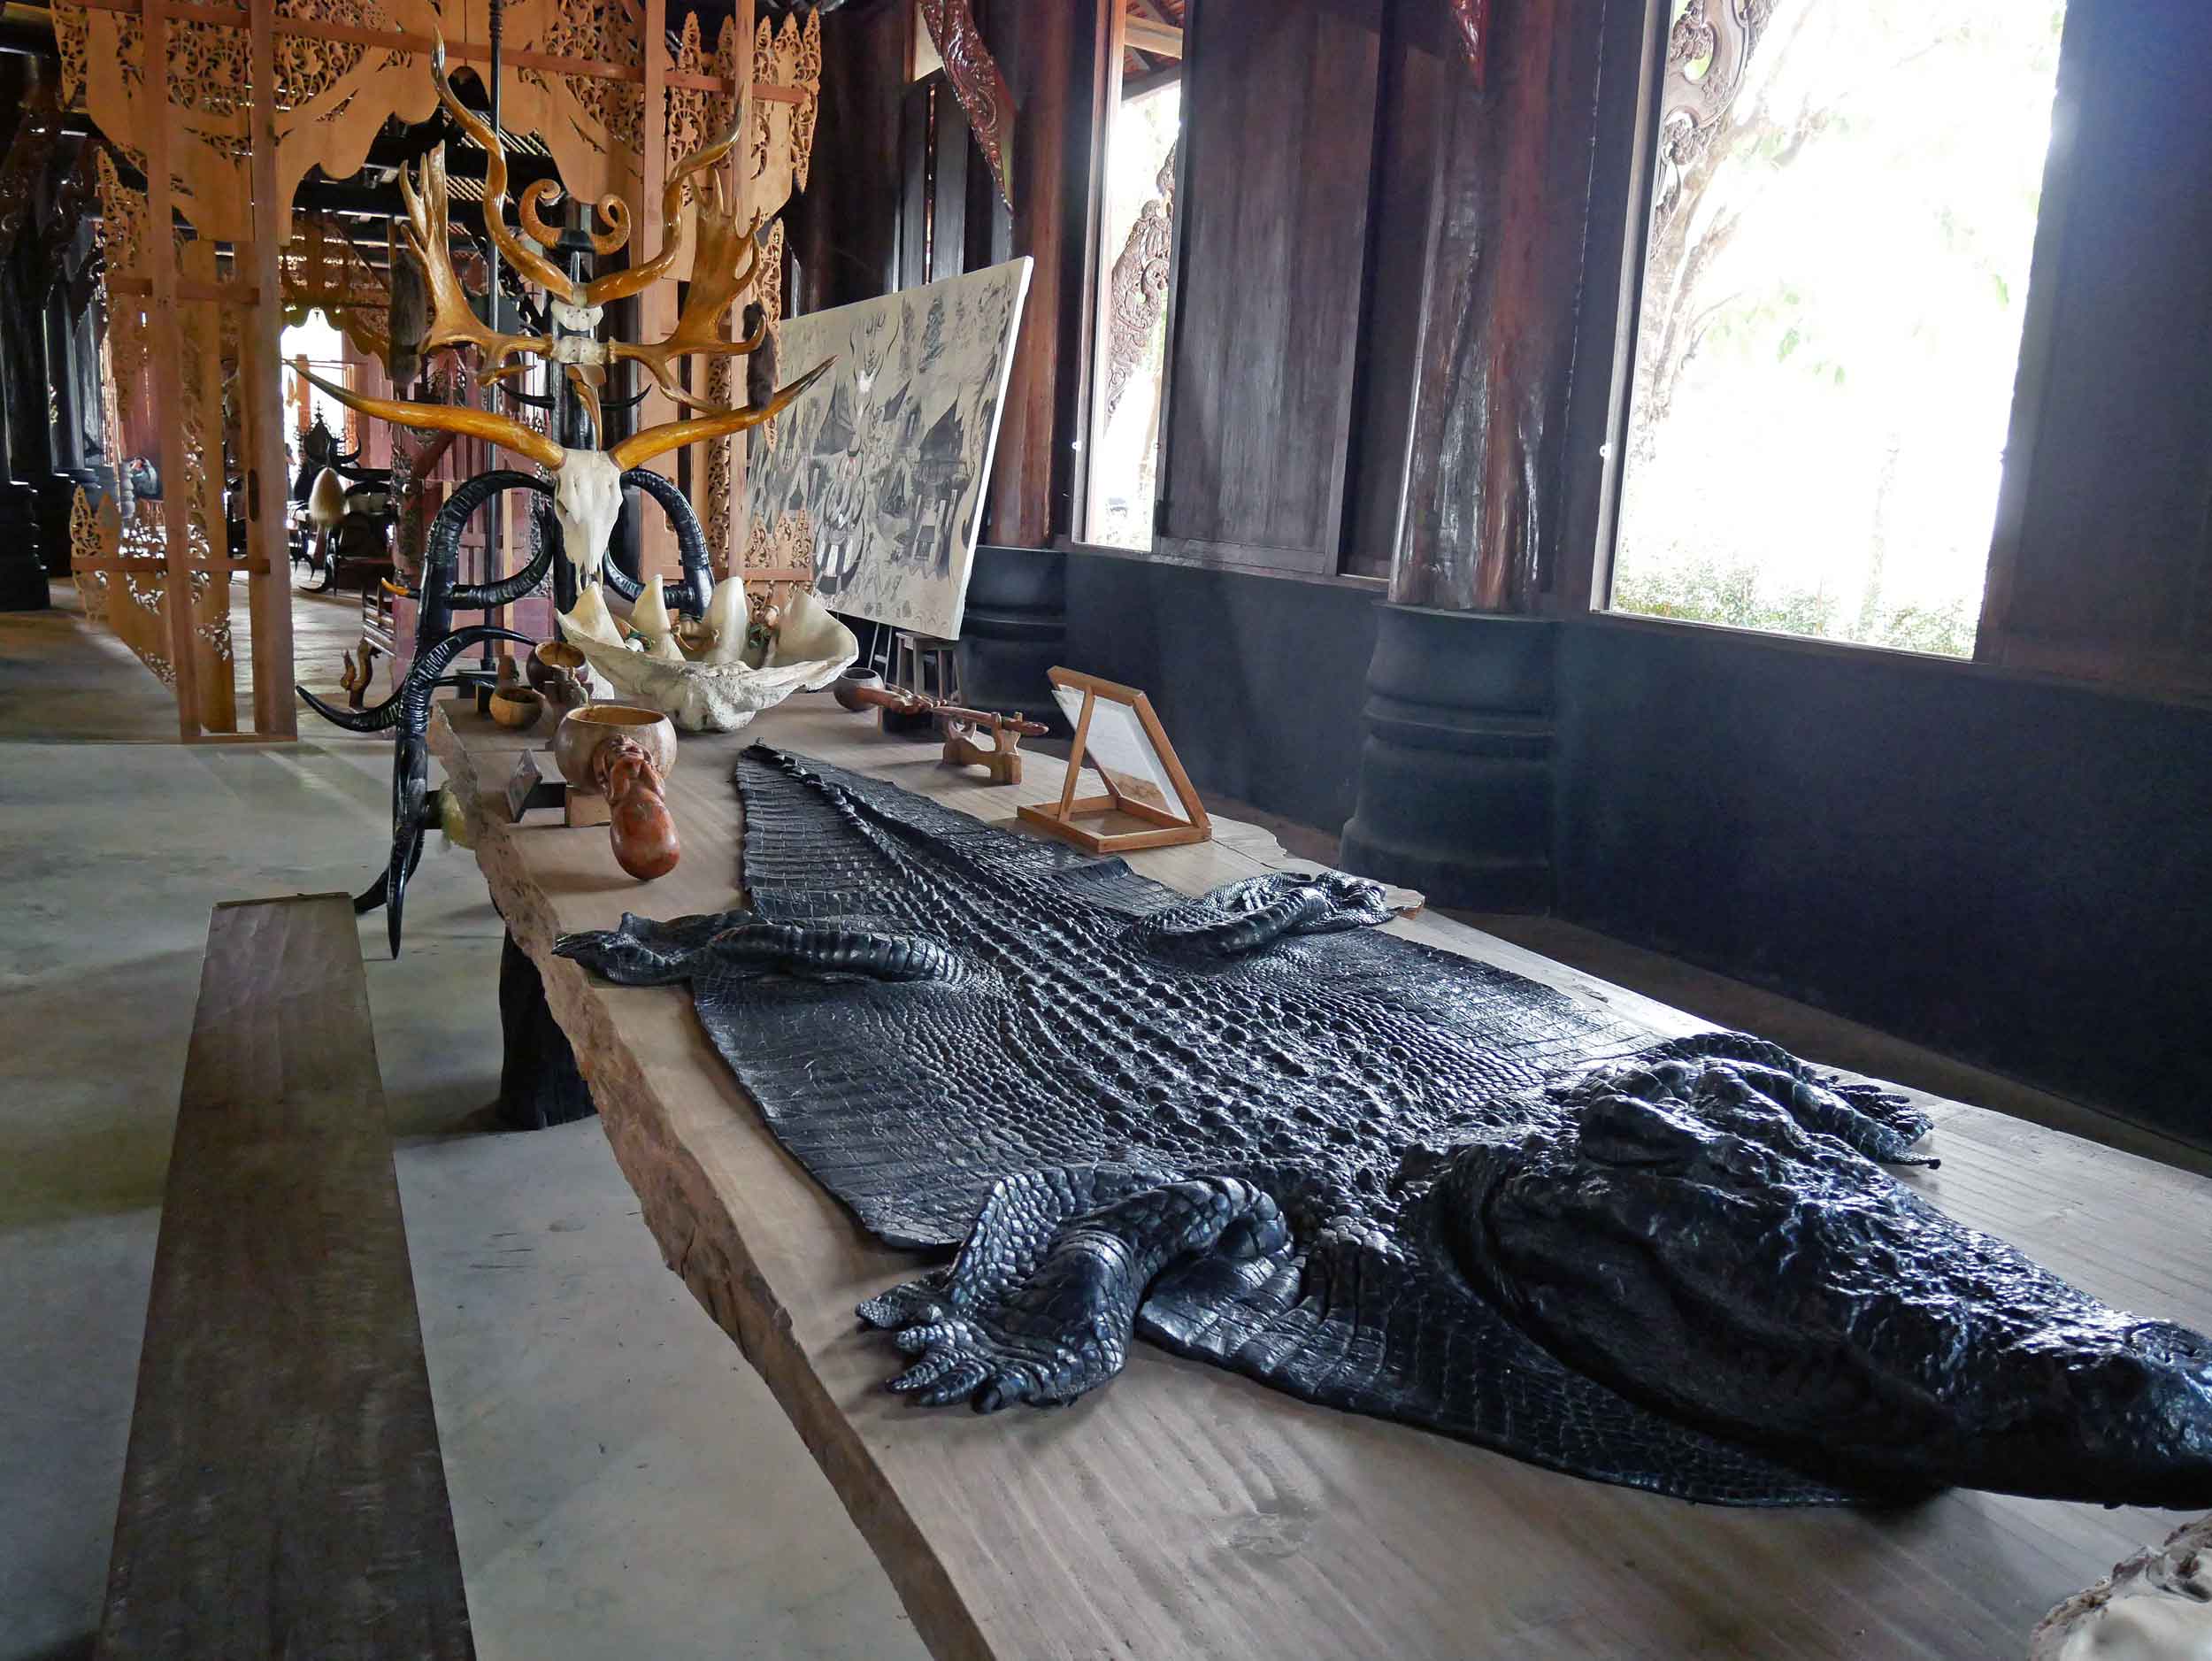  Many unique animal skins, bones and furs are found throughout the Black House.&nbsp; 